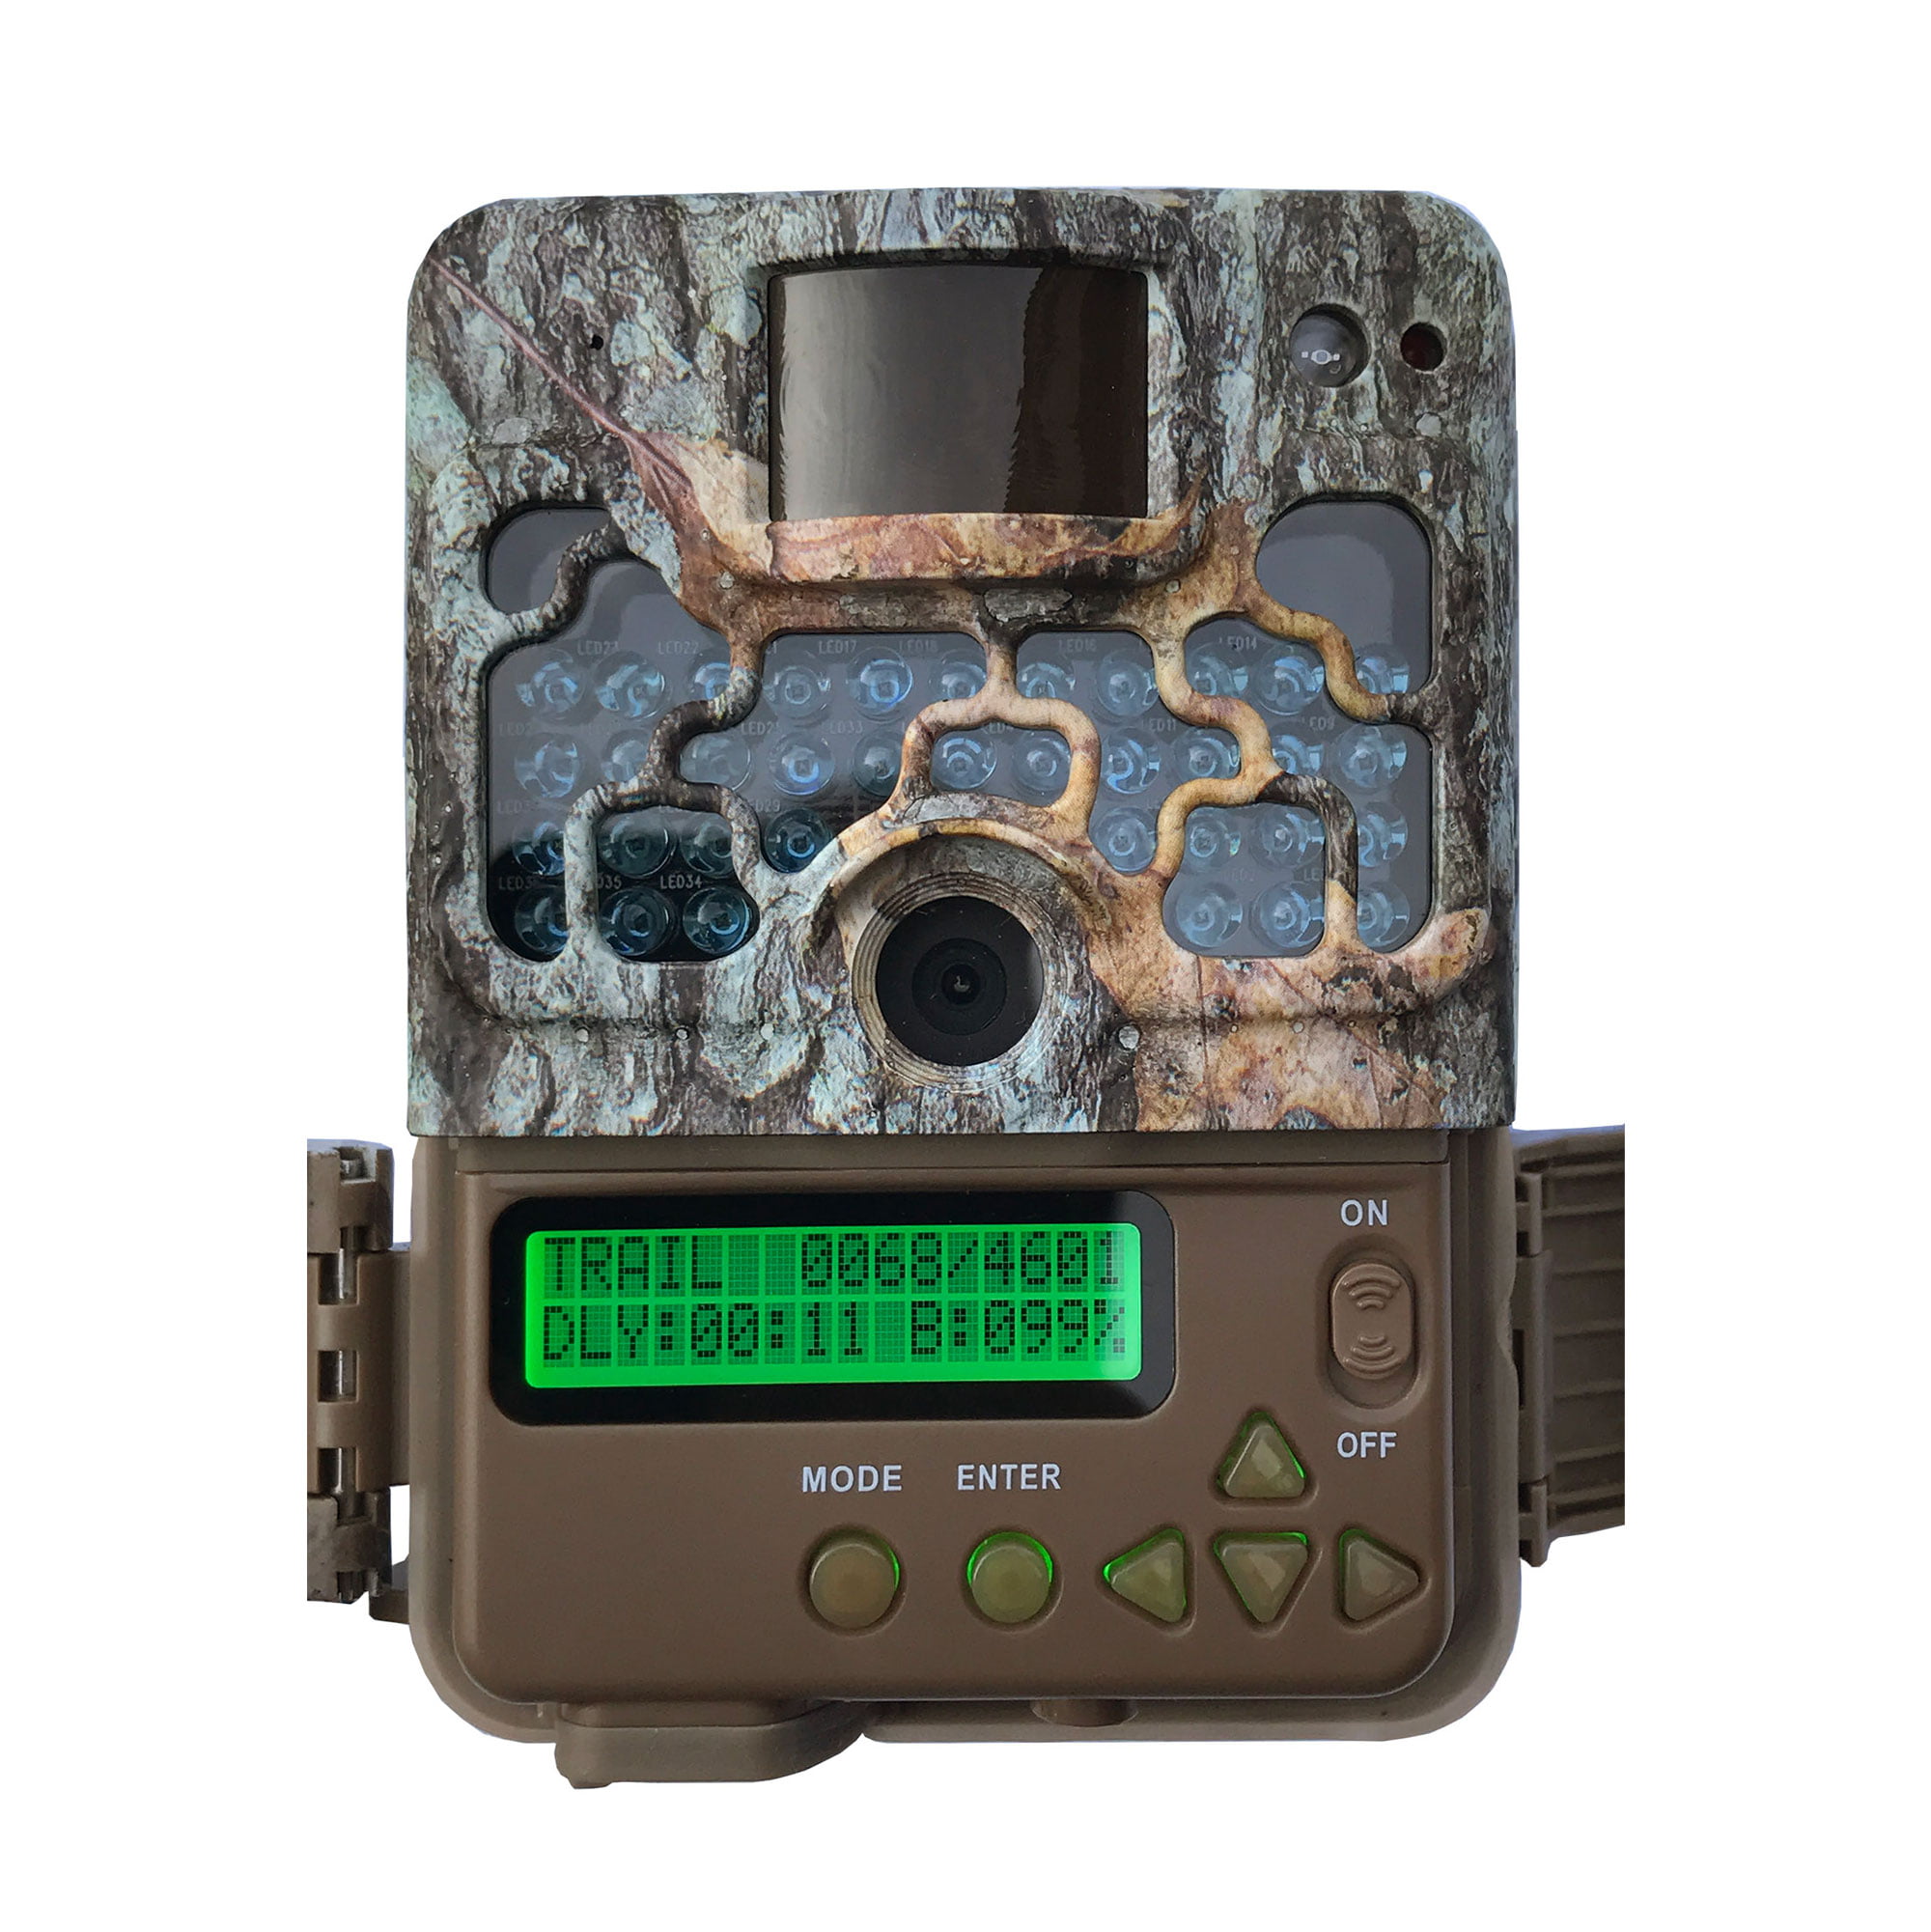 Browning Strike Force HD 10MP Compact Infrared LED Game Trail Camera BTC-5HD 